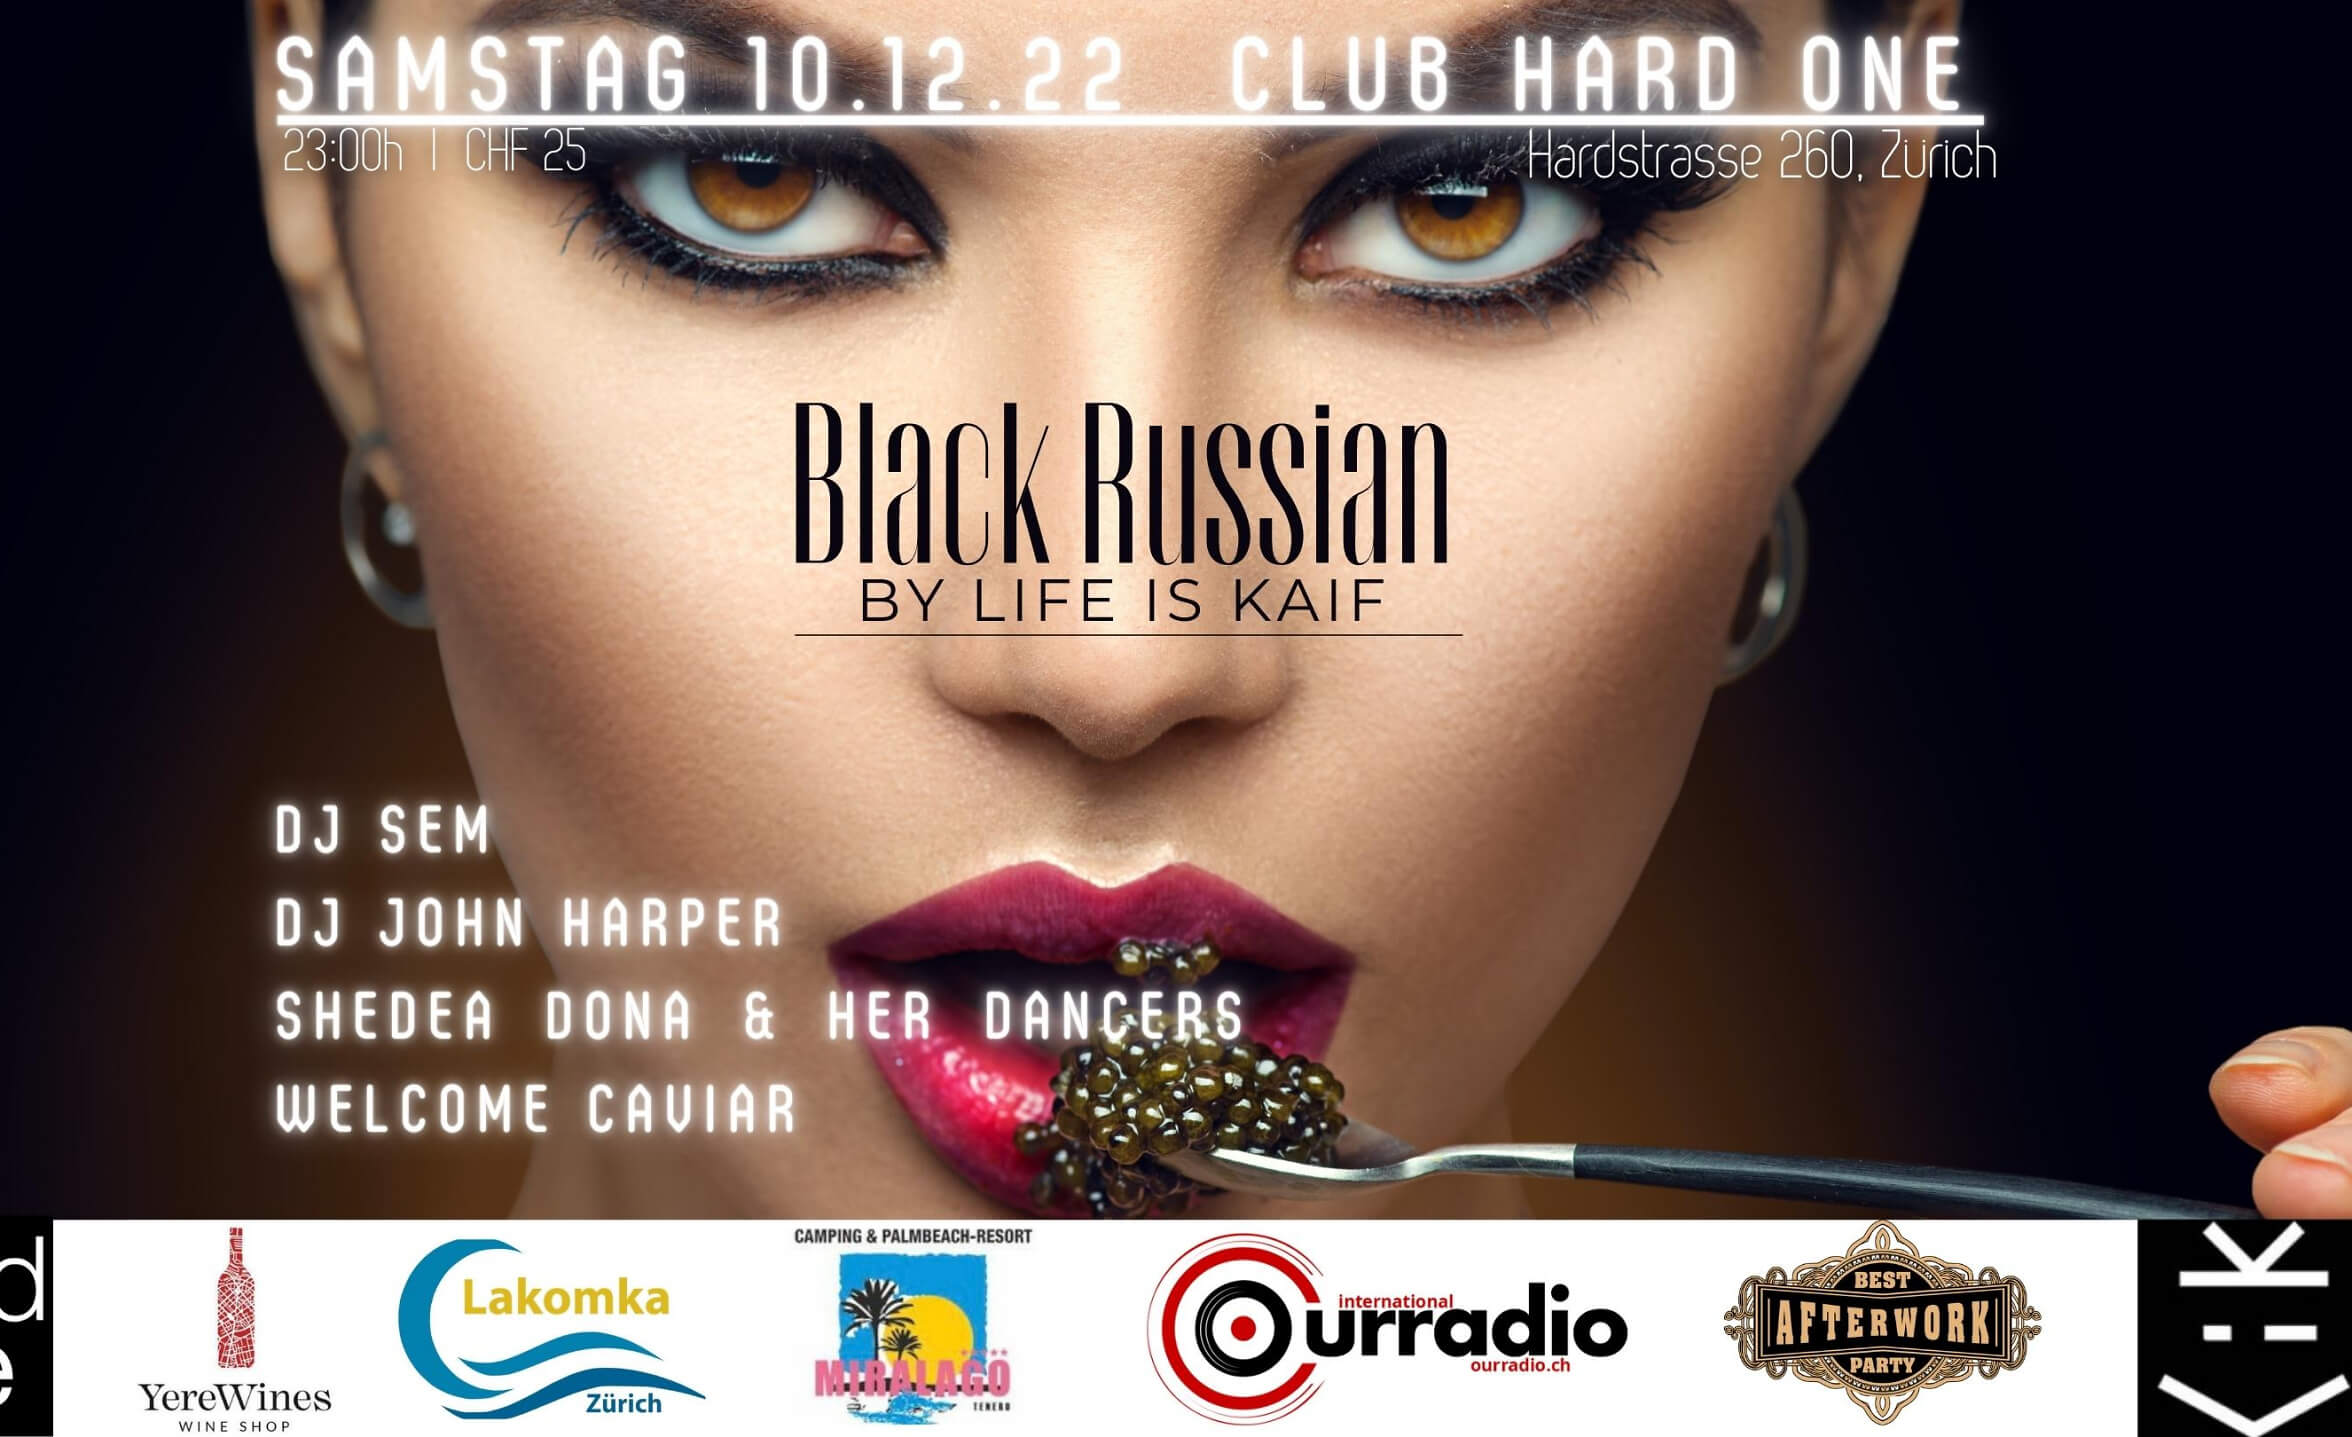 Event-Image for 'Black Russian by life is kaif'